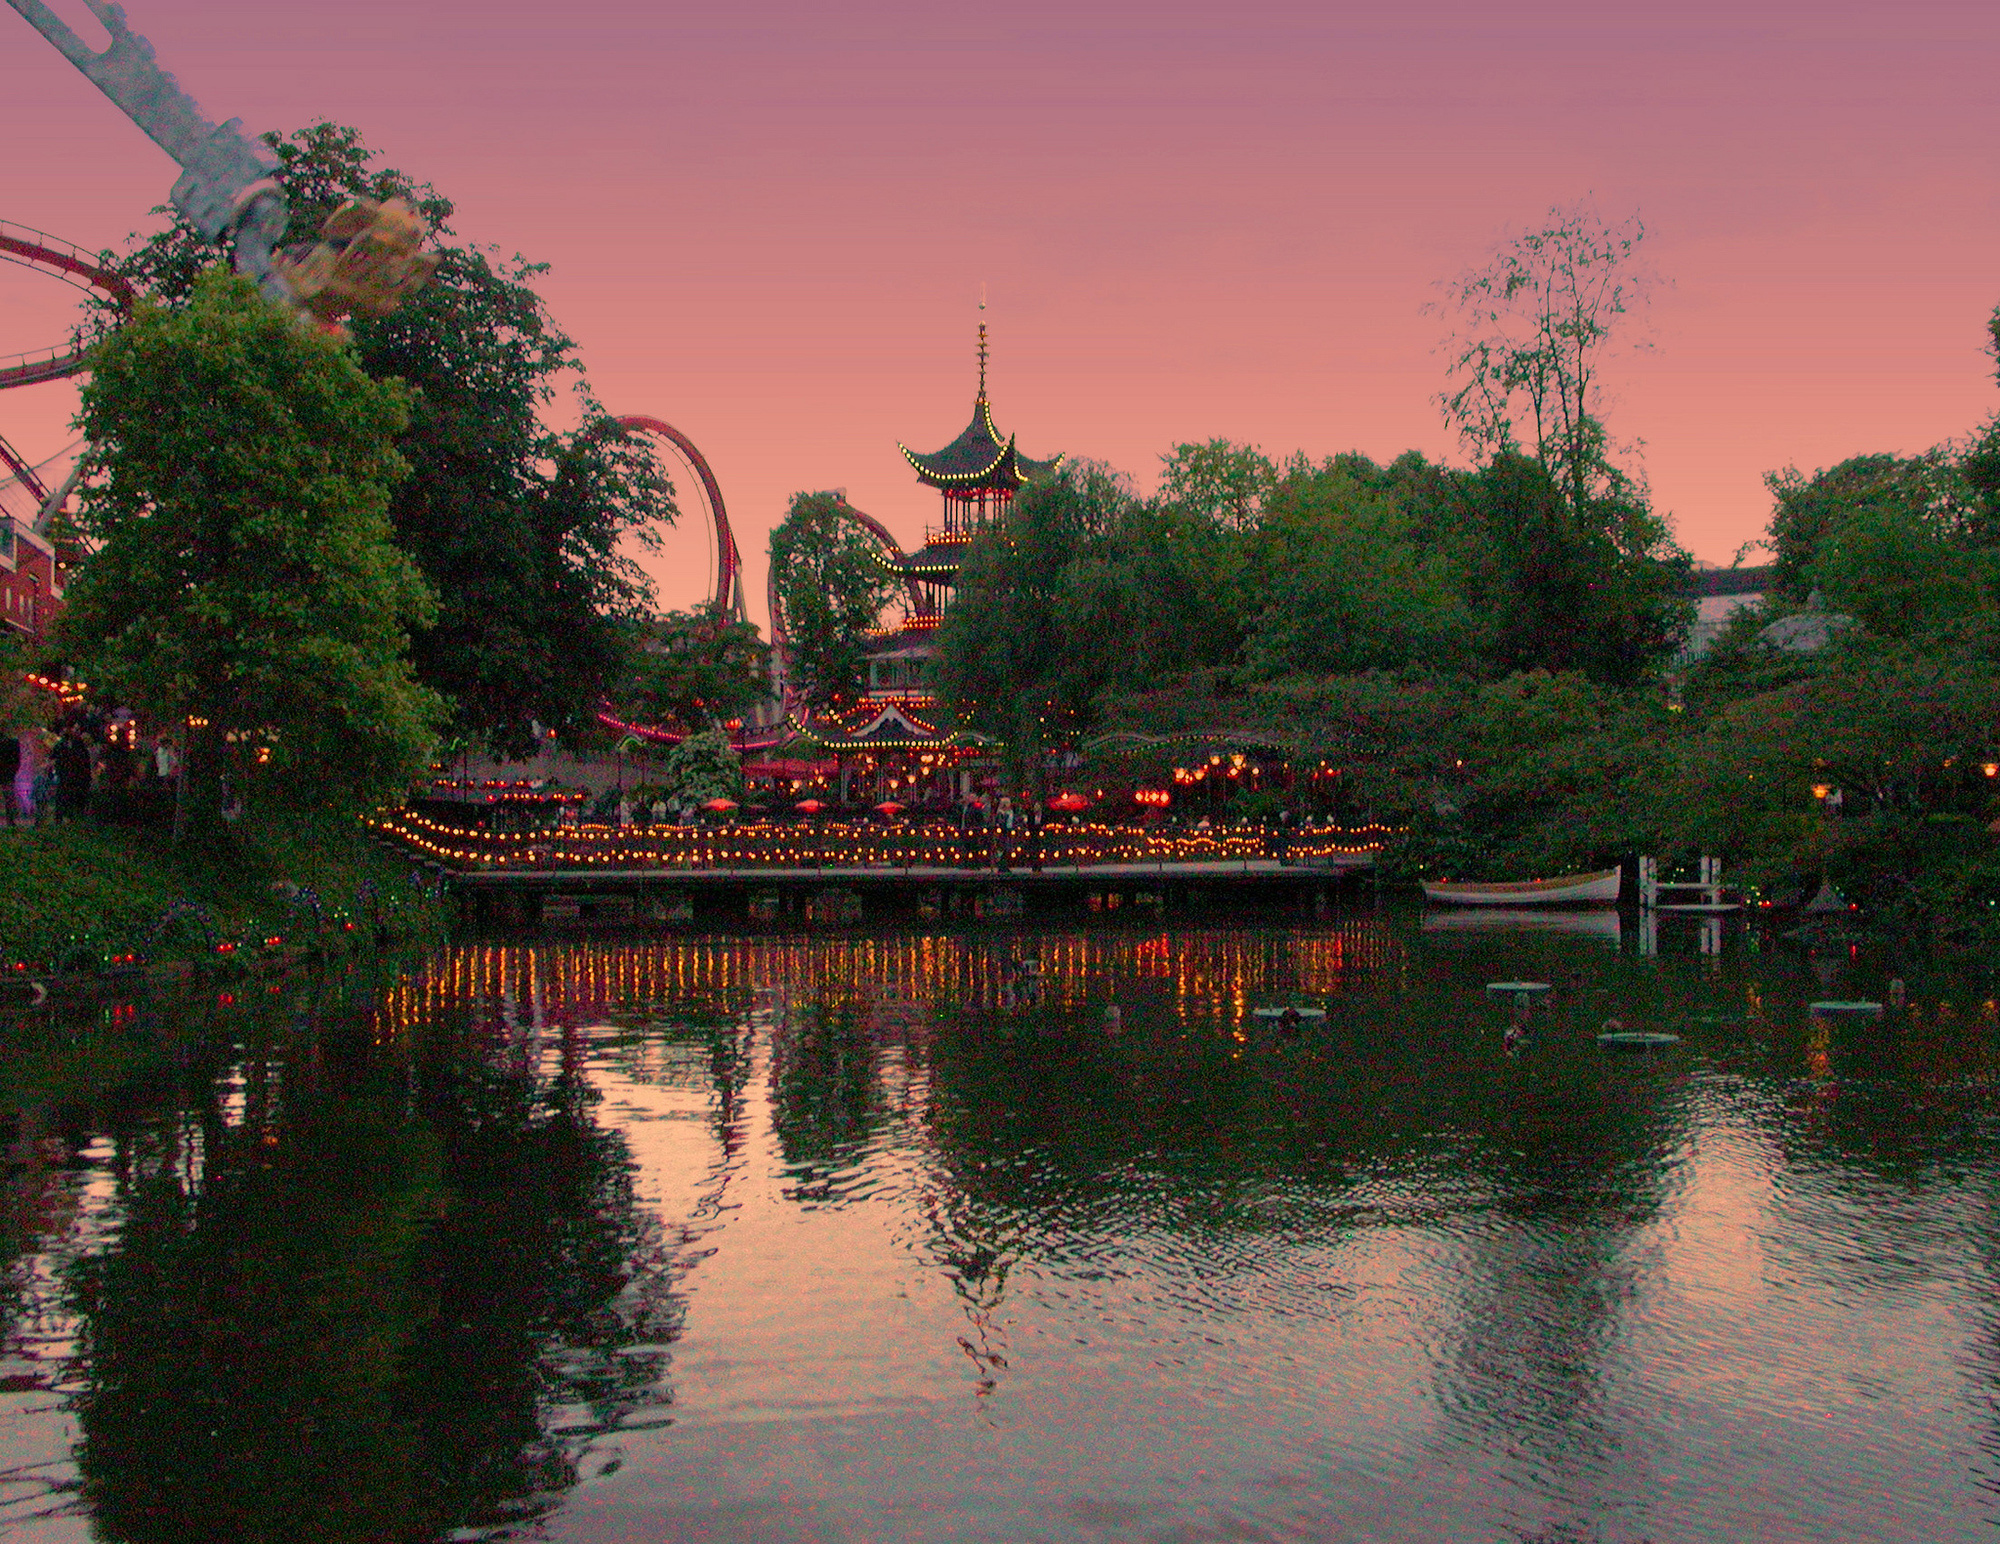 According to Forbes, Denmark is the world's happiest country. Here's a photo of Tivoli Gardens in Copenhagen.